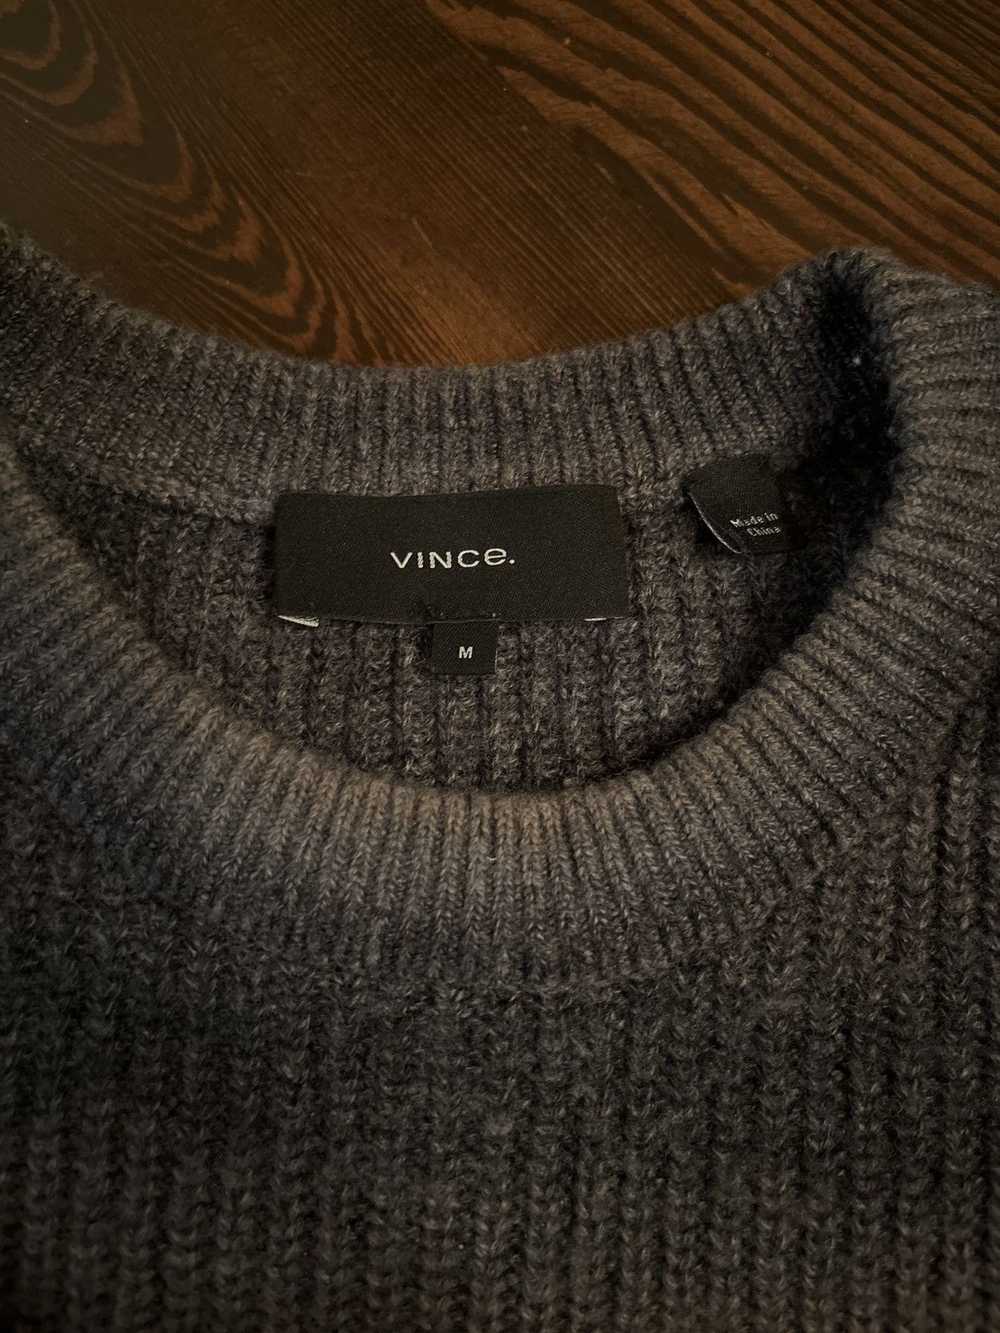 Vince Grey Striped Cashmere Blend Sweater - image 3